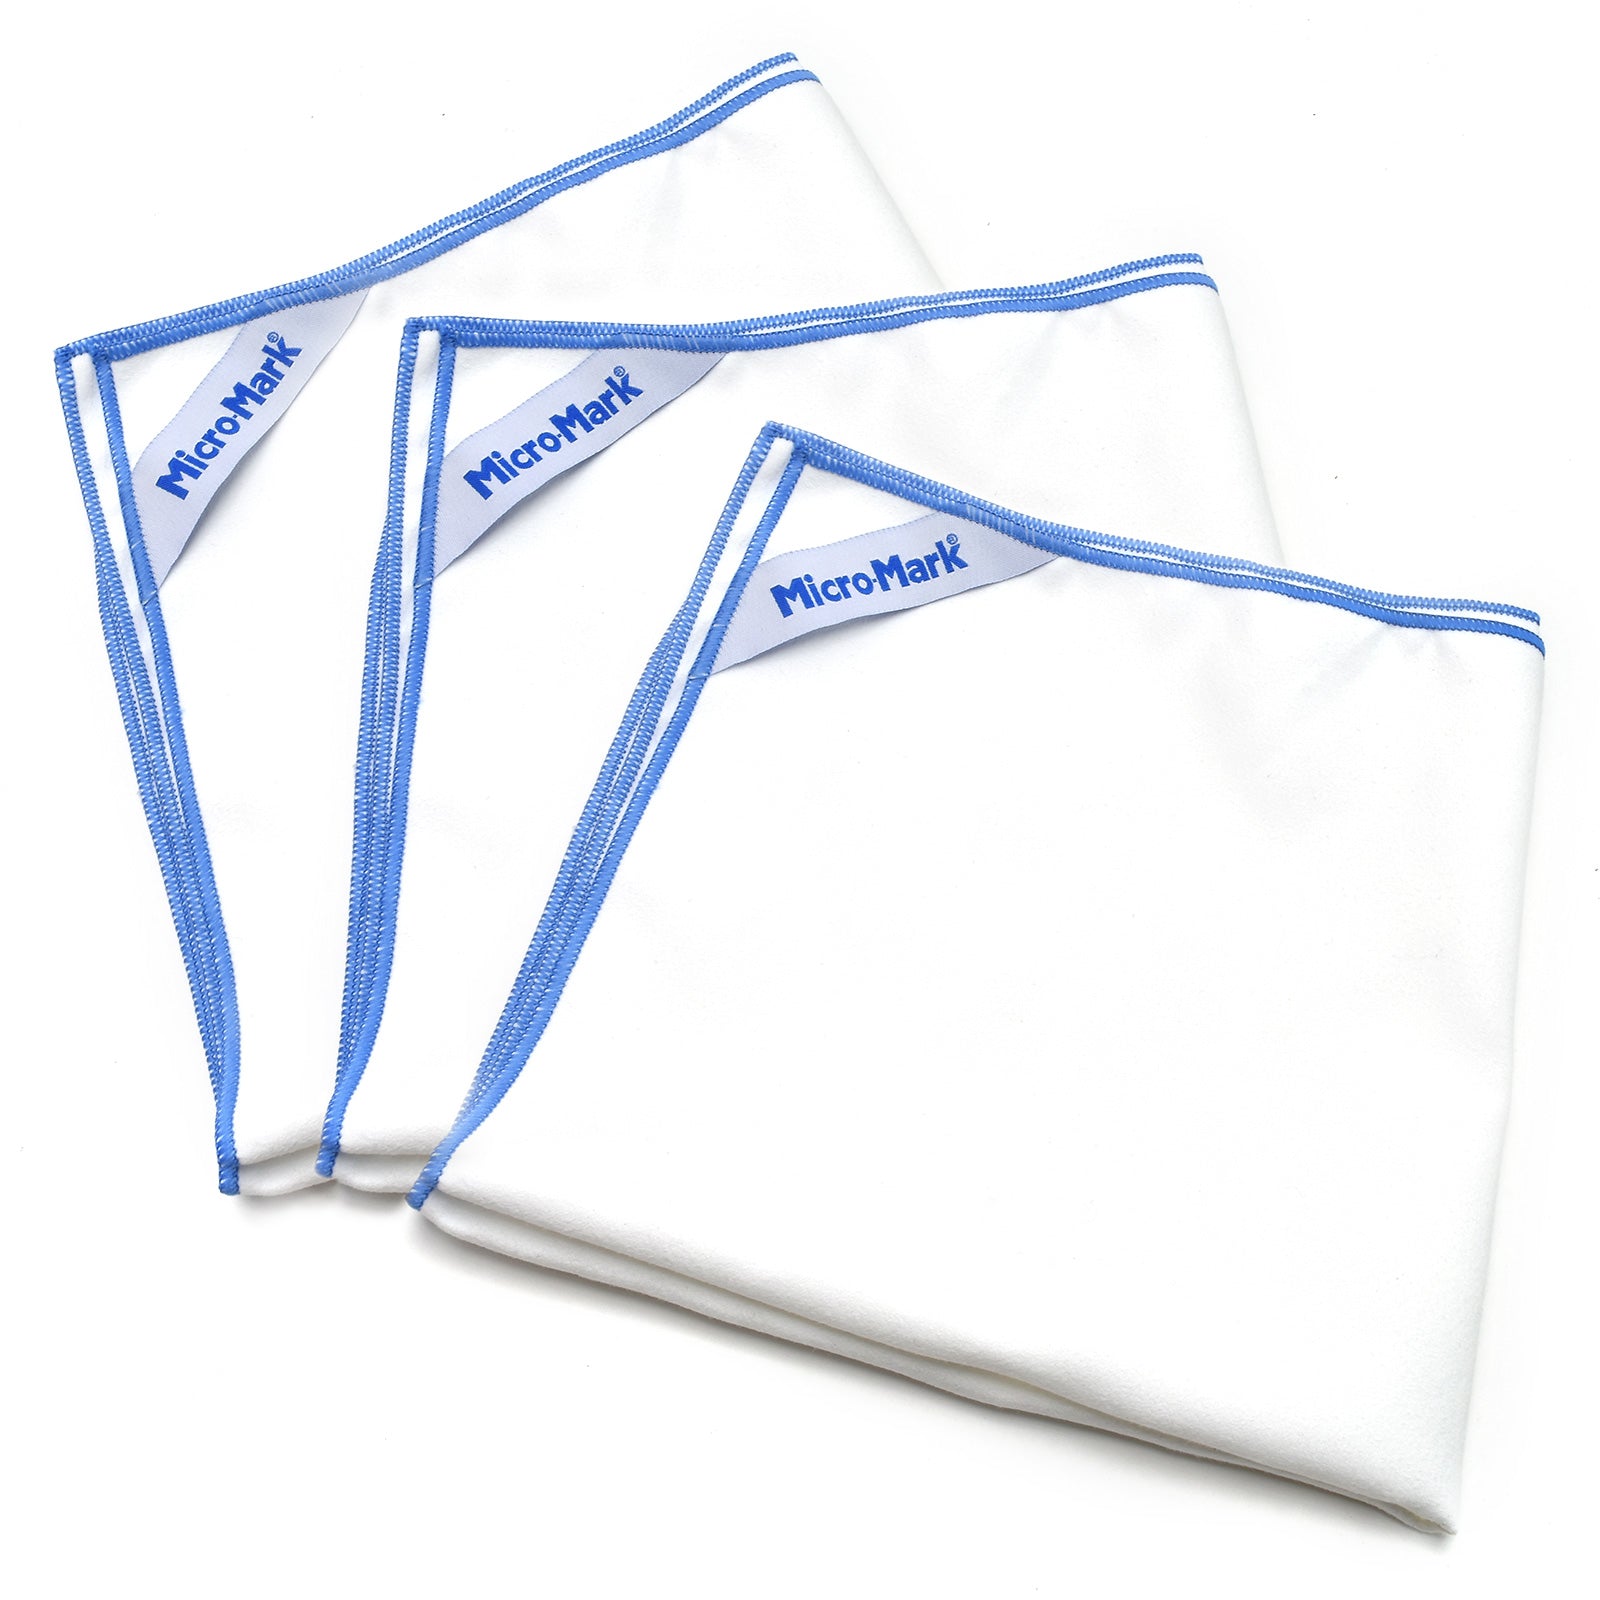 Micro - Mark Performance - Pro Microfiber Cleaning & Polishing Cloths, Pack of 3